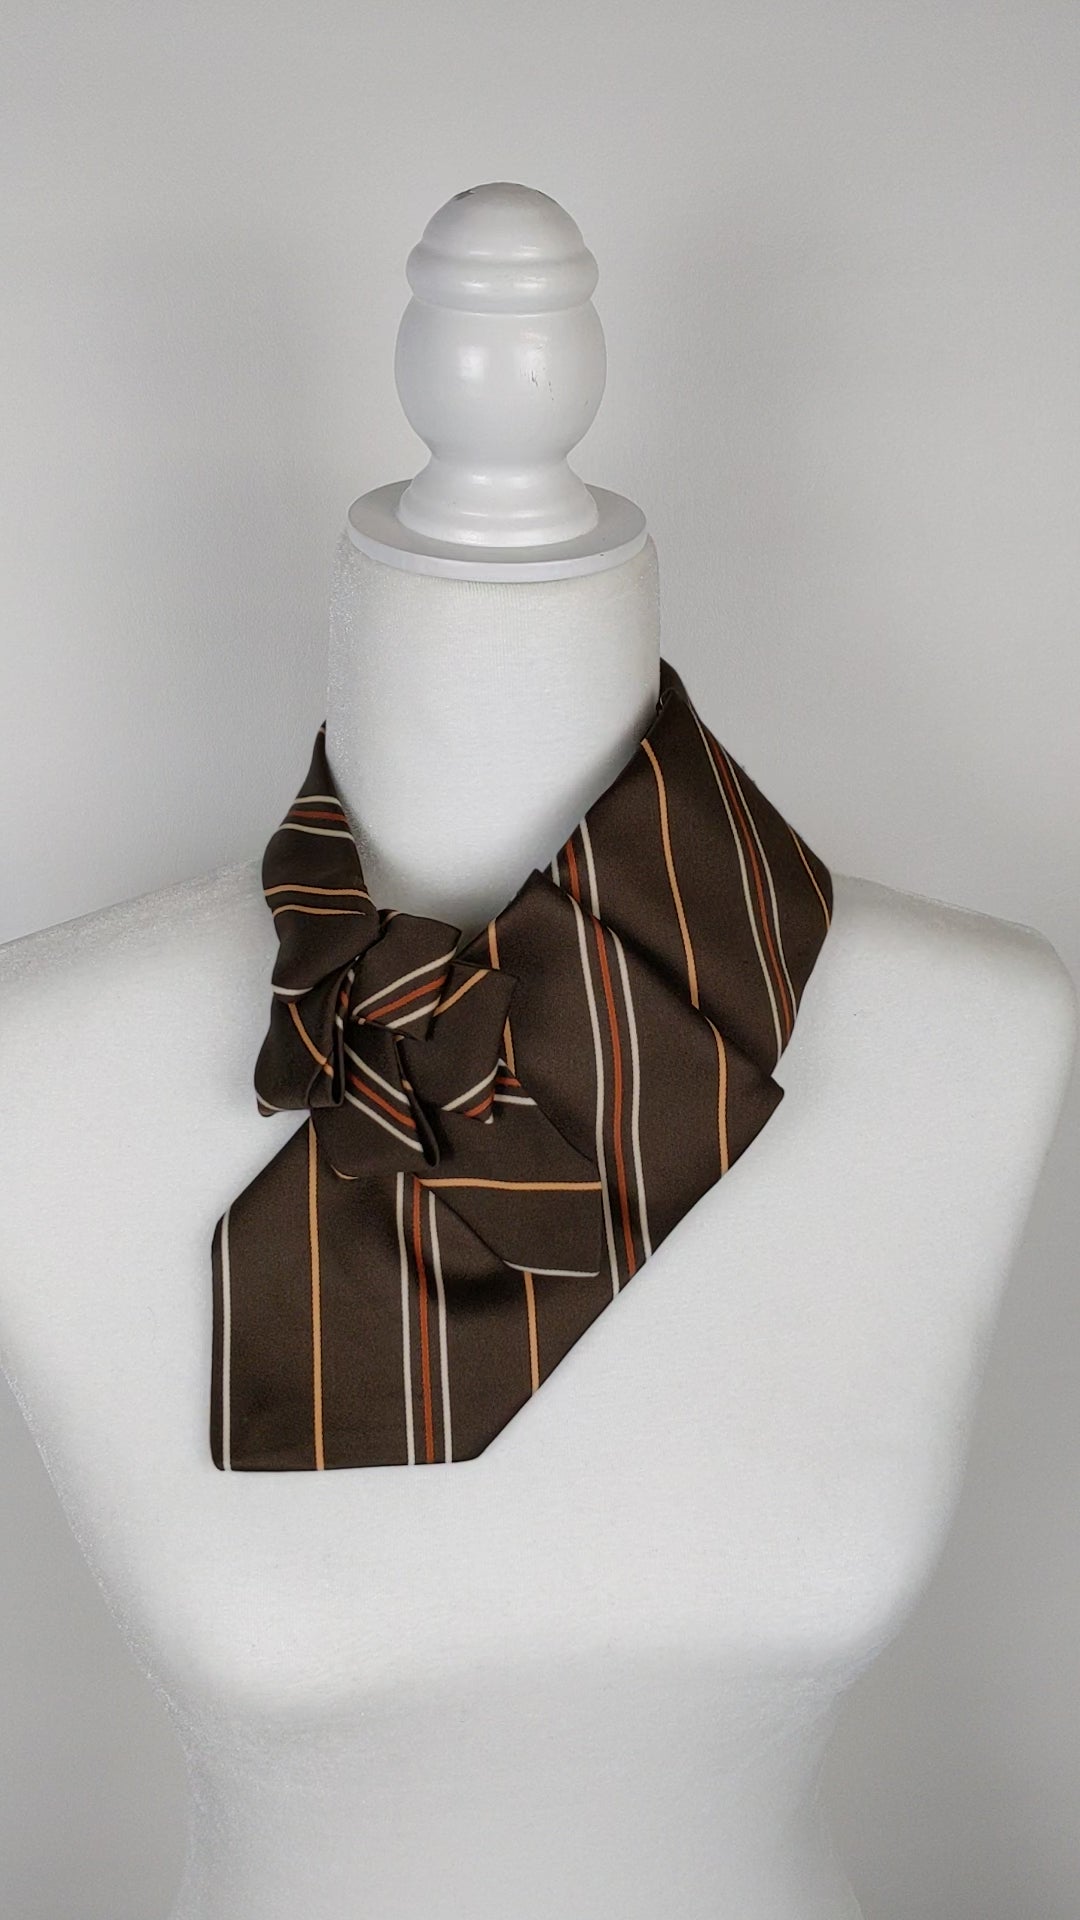 Women's Ascot Scarf In Chocolate Brown, Made From A Vintage Tie